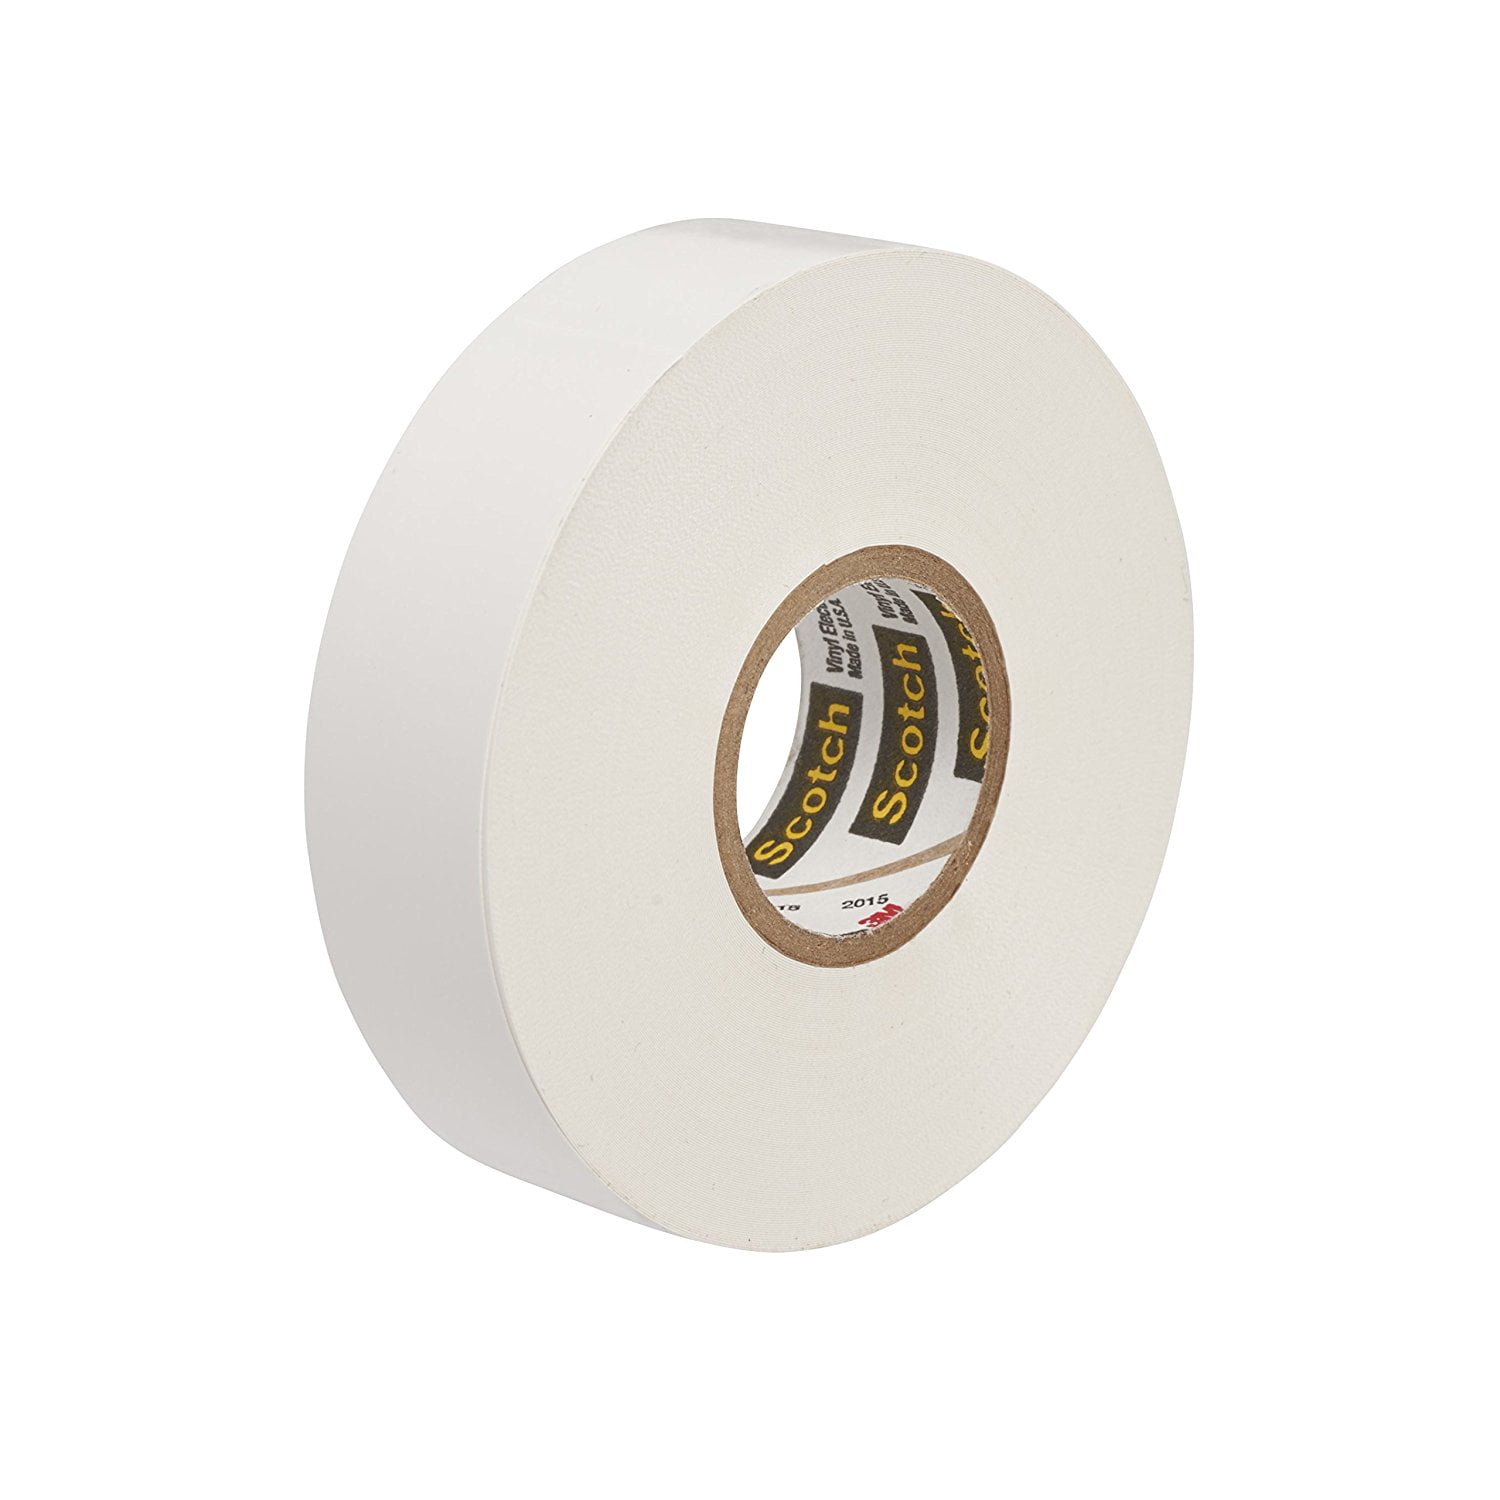 .75-Inch by 66-Foot by .007-Inch 3M Scotch #35 Electrical Tape White 